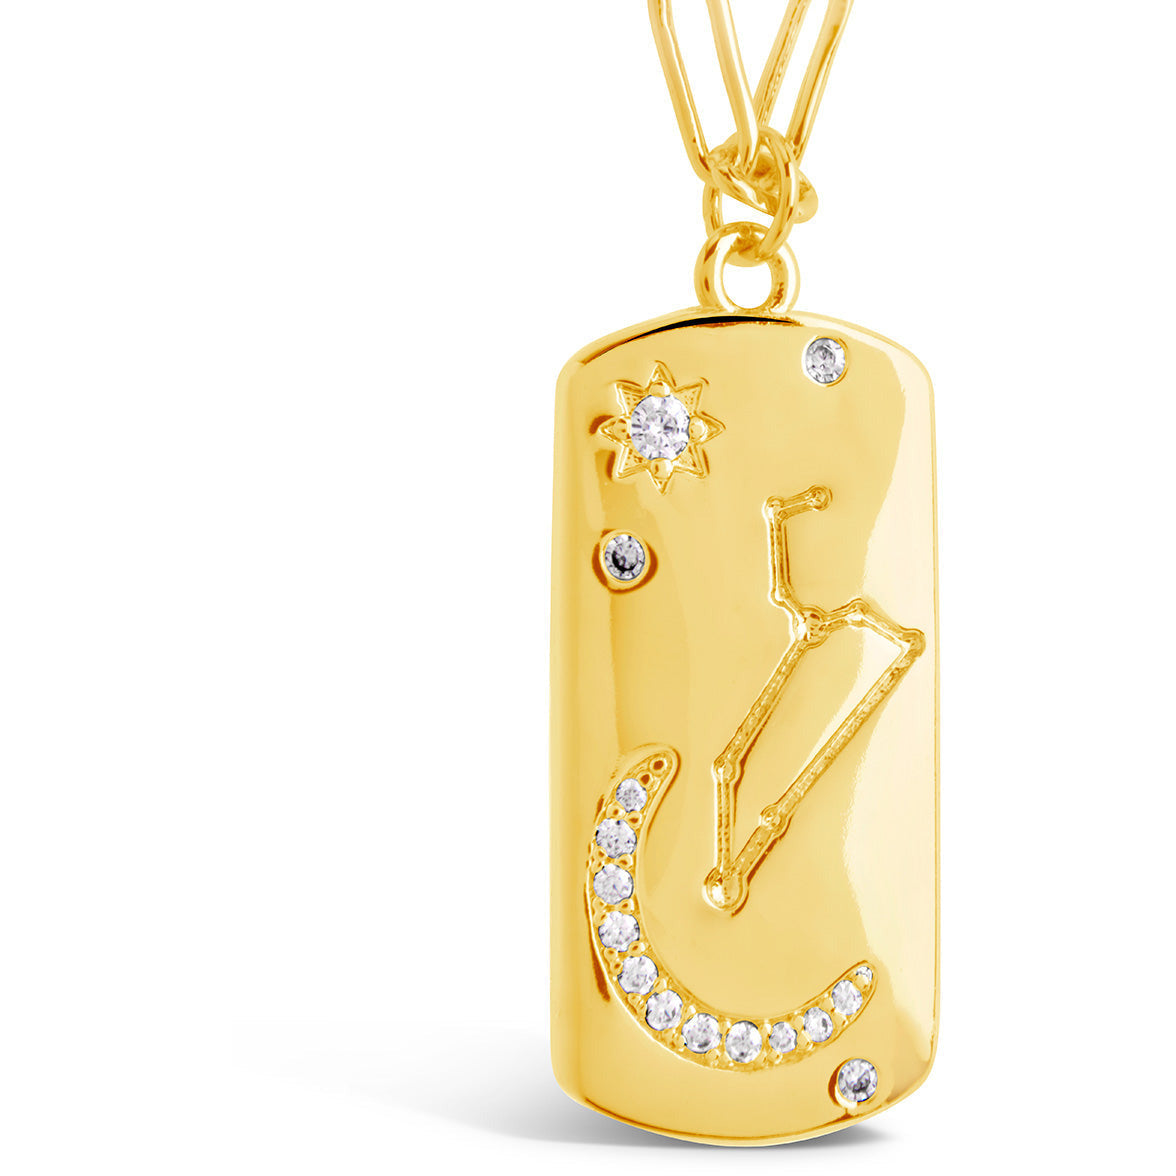 Constellation Dog Tag Necklace by Sterling Forever